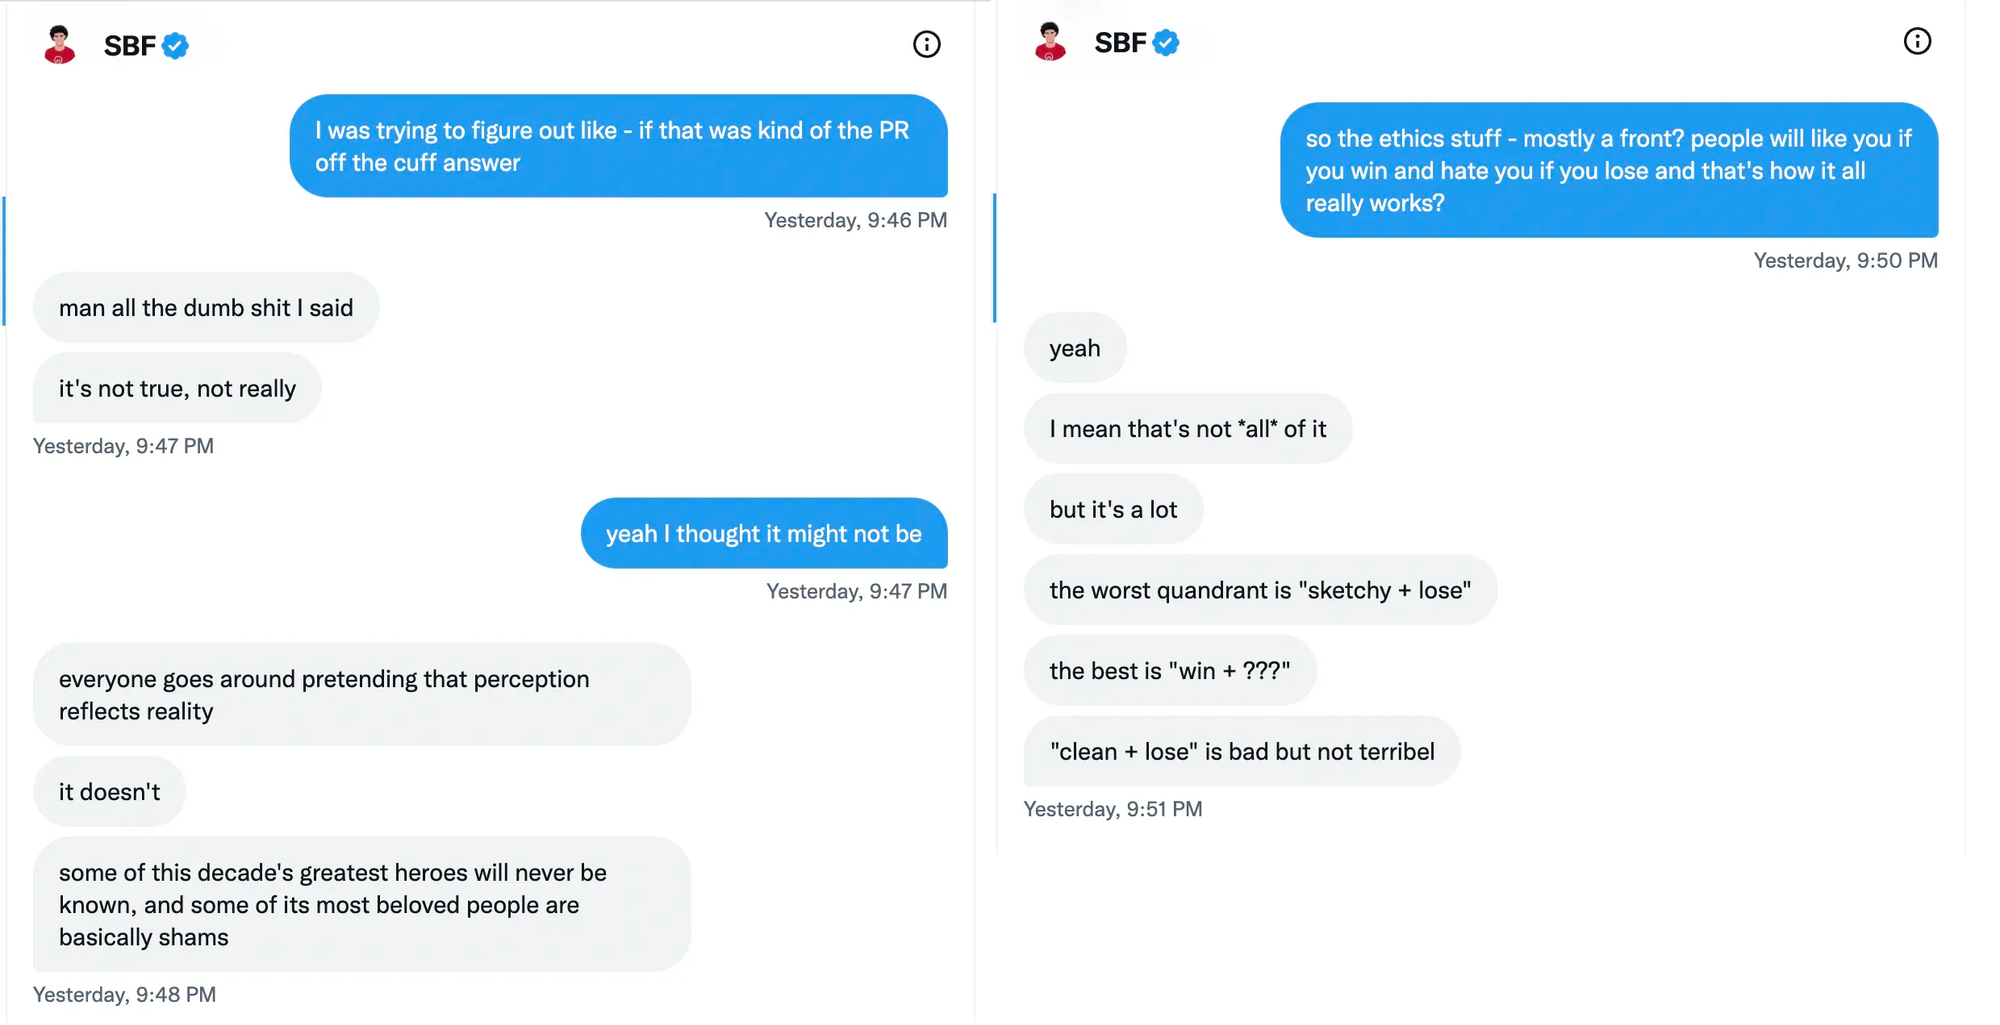 Two screenshots of Twitter DMs, side by side: Kelsey Piper: I was trying to figure out like - if that was kind of the PR off the cuff answer Sam Bankman-Fried: man all the dumb shit I said it's not true, not really Kelsey Piper: yeah I thought it might not be Sam Bankman-Fried: everyone goes around pretending that perception reflects reality. it doesn't. some of this decade's greatest heroes will never be known, and some of its most beloved people are basically shams.   Kelsey Piper: so the ethics stuff - mostly a front? people will like you if you win and hate you if you lose and that's how it all really works? Sam Bankman-Fried: yeah. I mean that's not *all* of it. but it's a lot. the worst quandrant is 